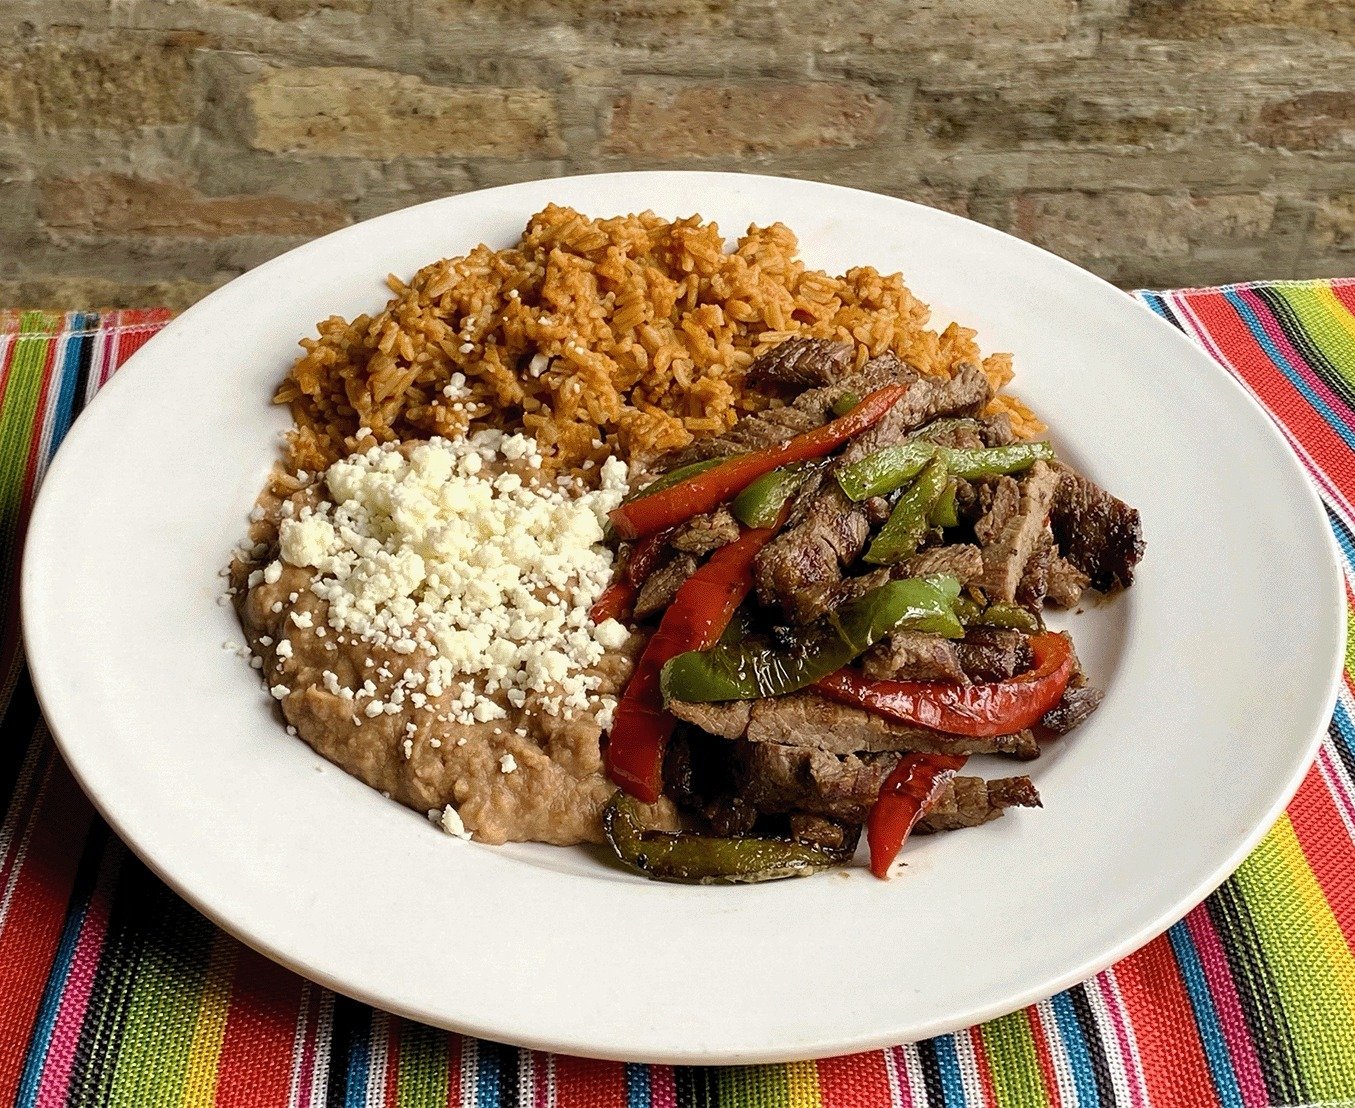 Our Steak Fajita special runs all weekend + $4 Modelo and Corona bottles, $6 Termana Blanco shots, and $10 Maker's Mark Mint Juleps. Enjoy May 3-5 - cheers!
.
.
.
.
.
(pic: TLM) #chicagofoodanddrink #chicagofoodauthority #312food #fabfoodchicago #bes